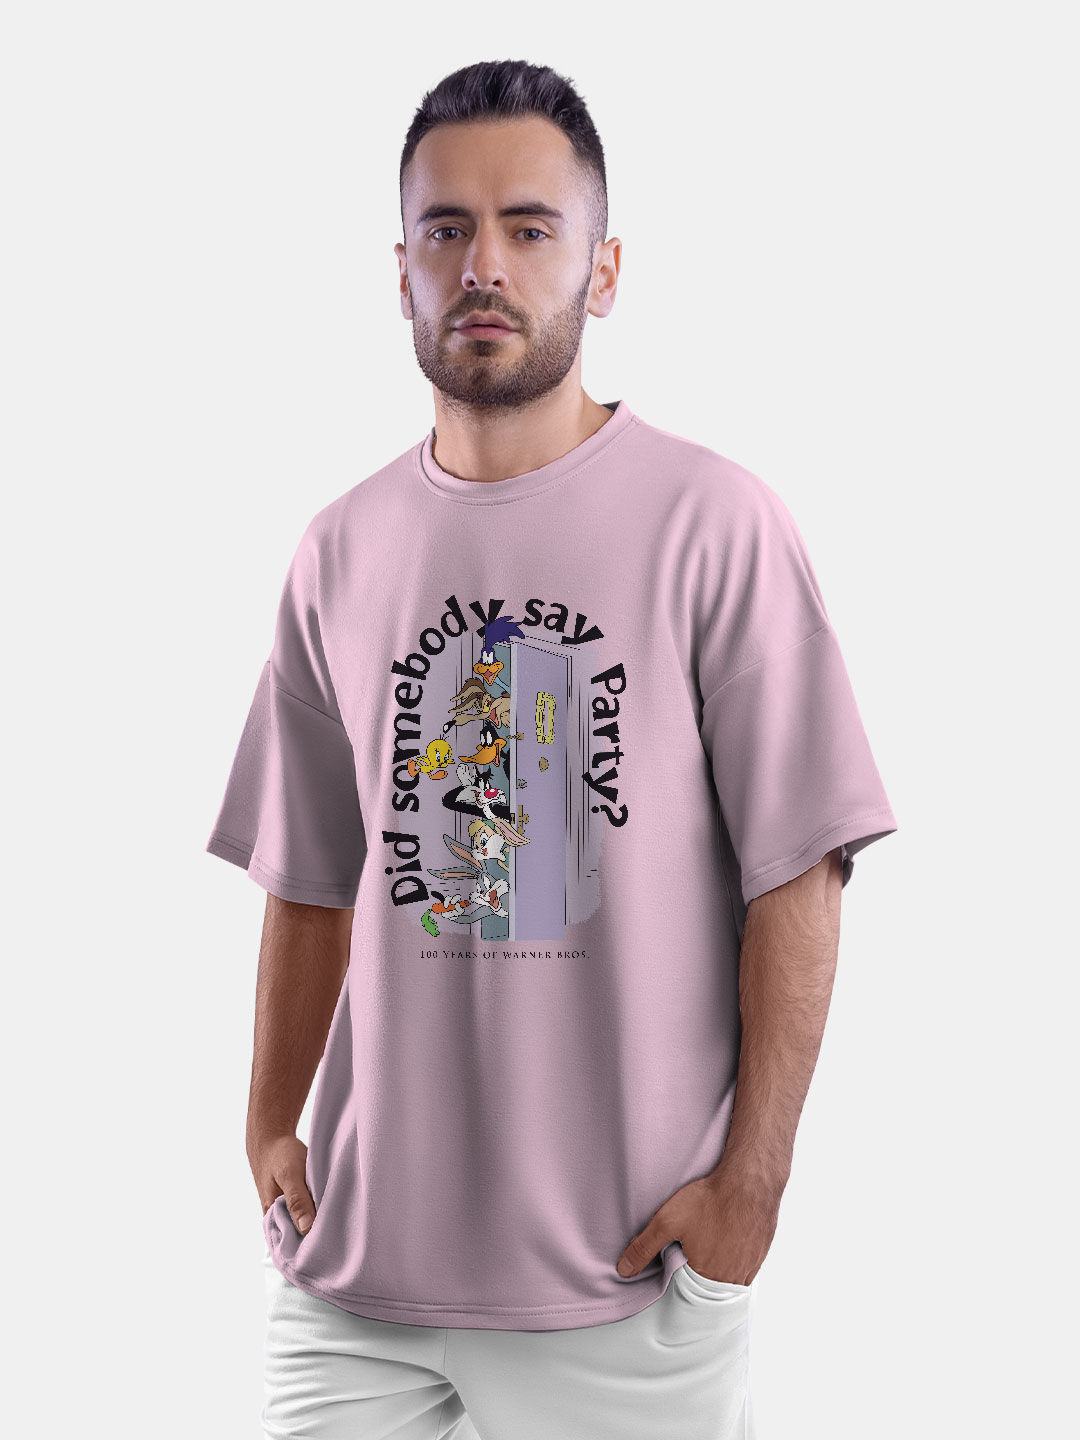 Friends Party - Mens Oversized T-Shirt Size : S Color - Baby Pink| Mens T-Shirt Size S Color : Pink